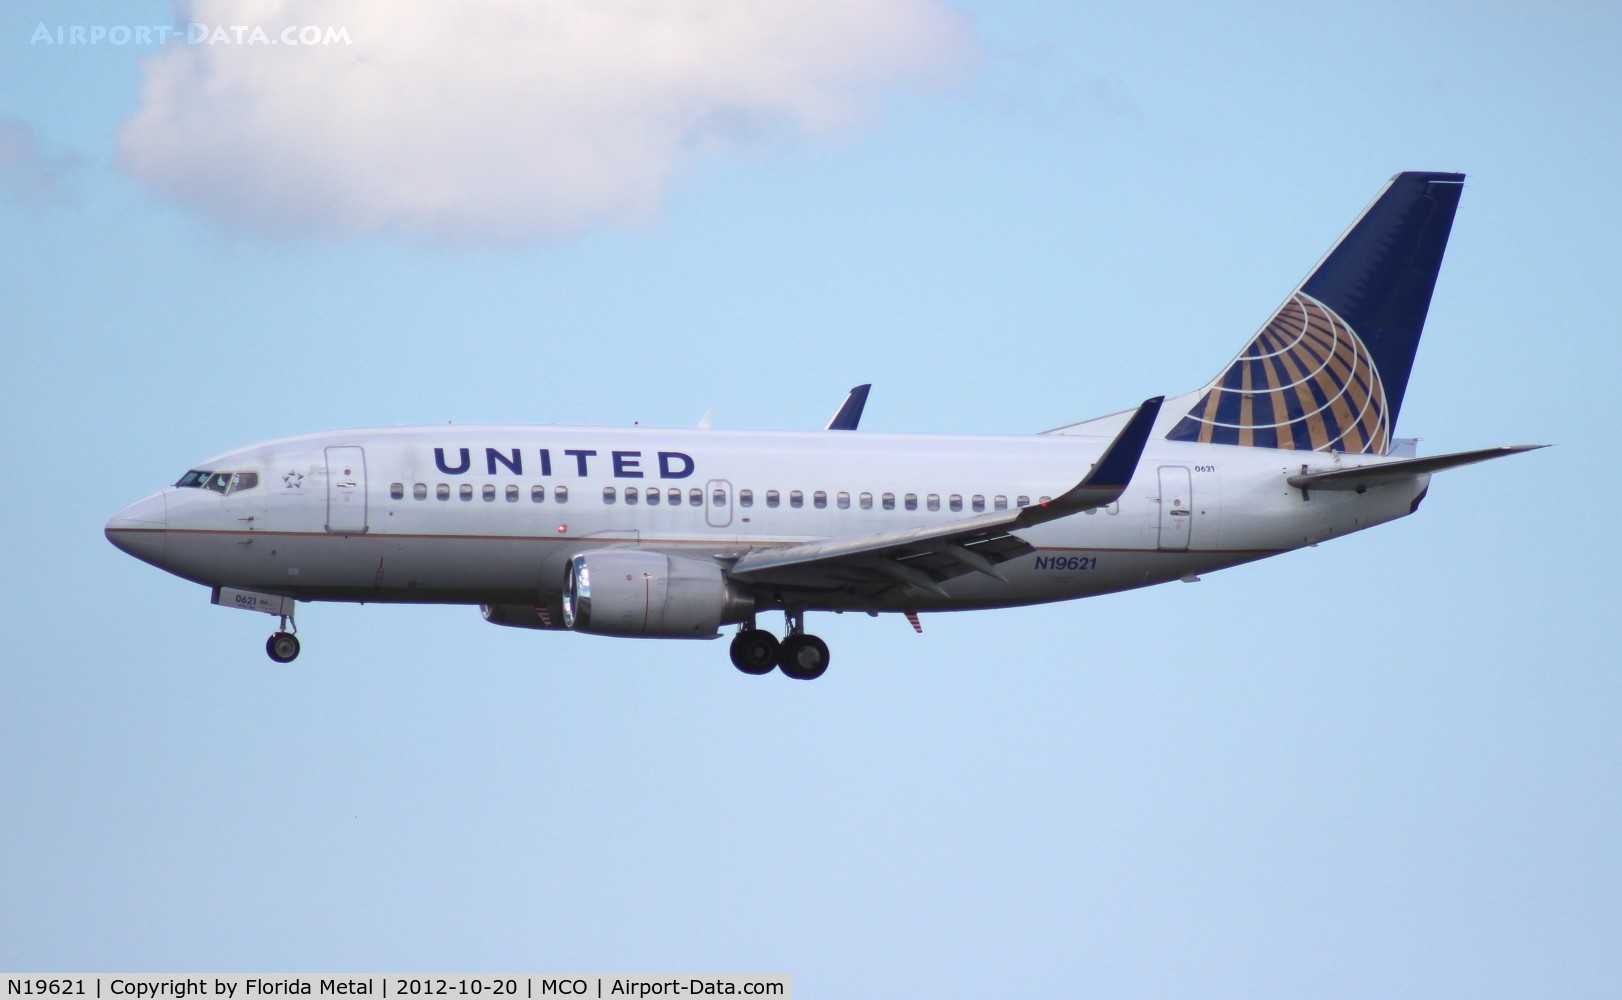 N19621, 1994 Boeing 737-524 C/N 27334, United 737-500 one of the last flying at the time